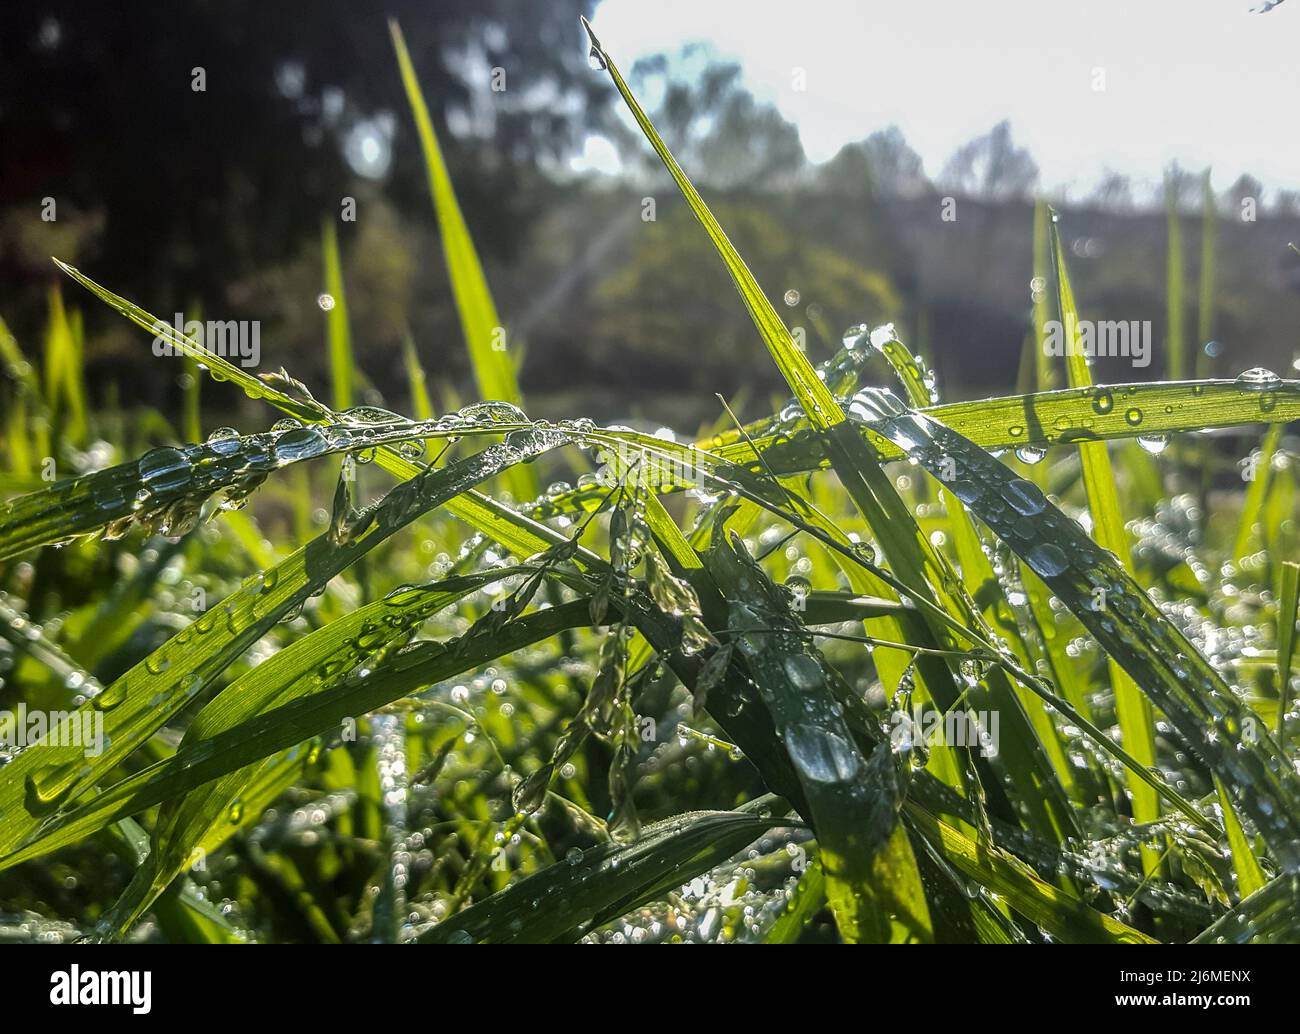 Beautiful long green grass on a springtime day full of drops of dew. Dark background Stock Photo